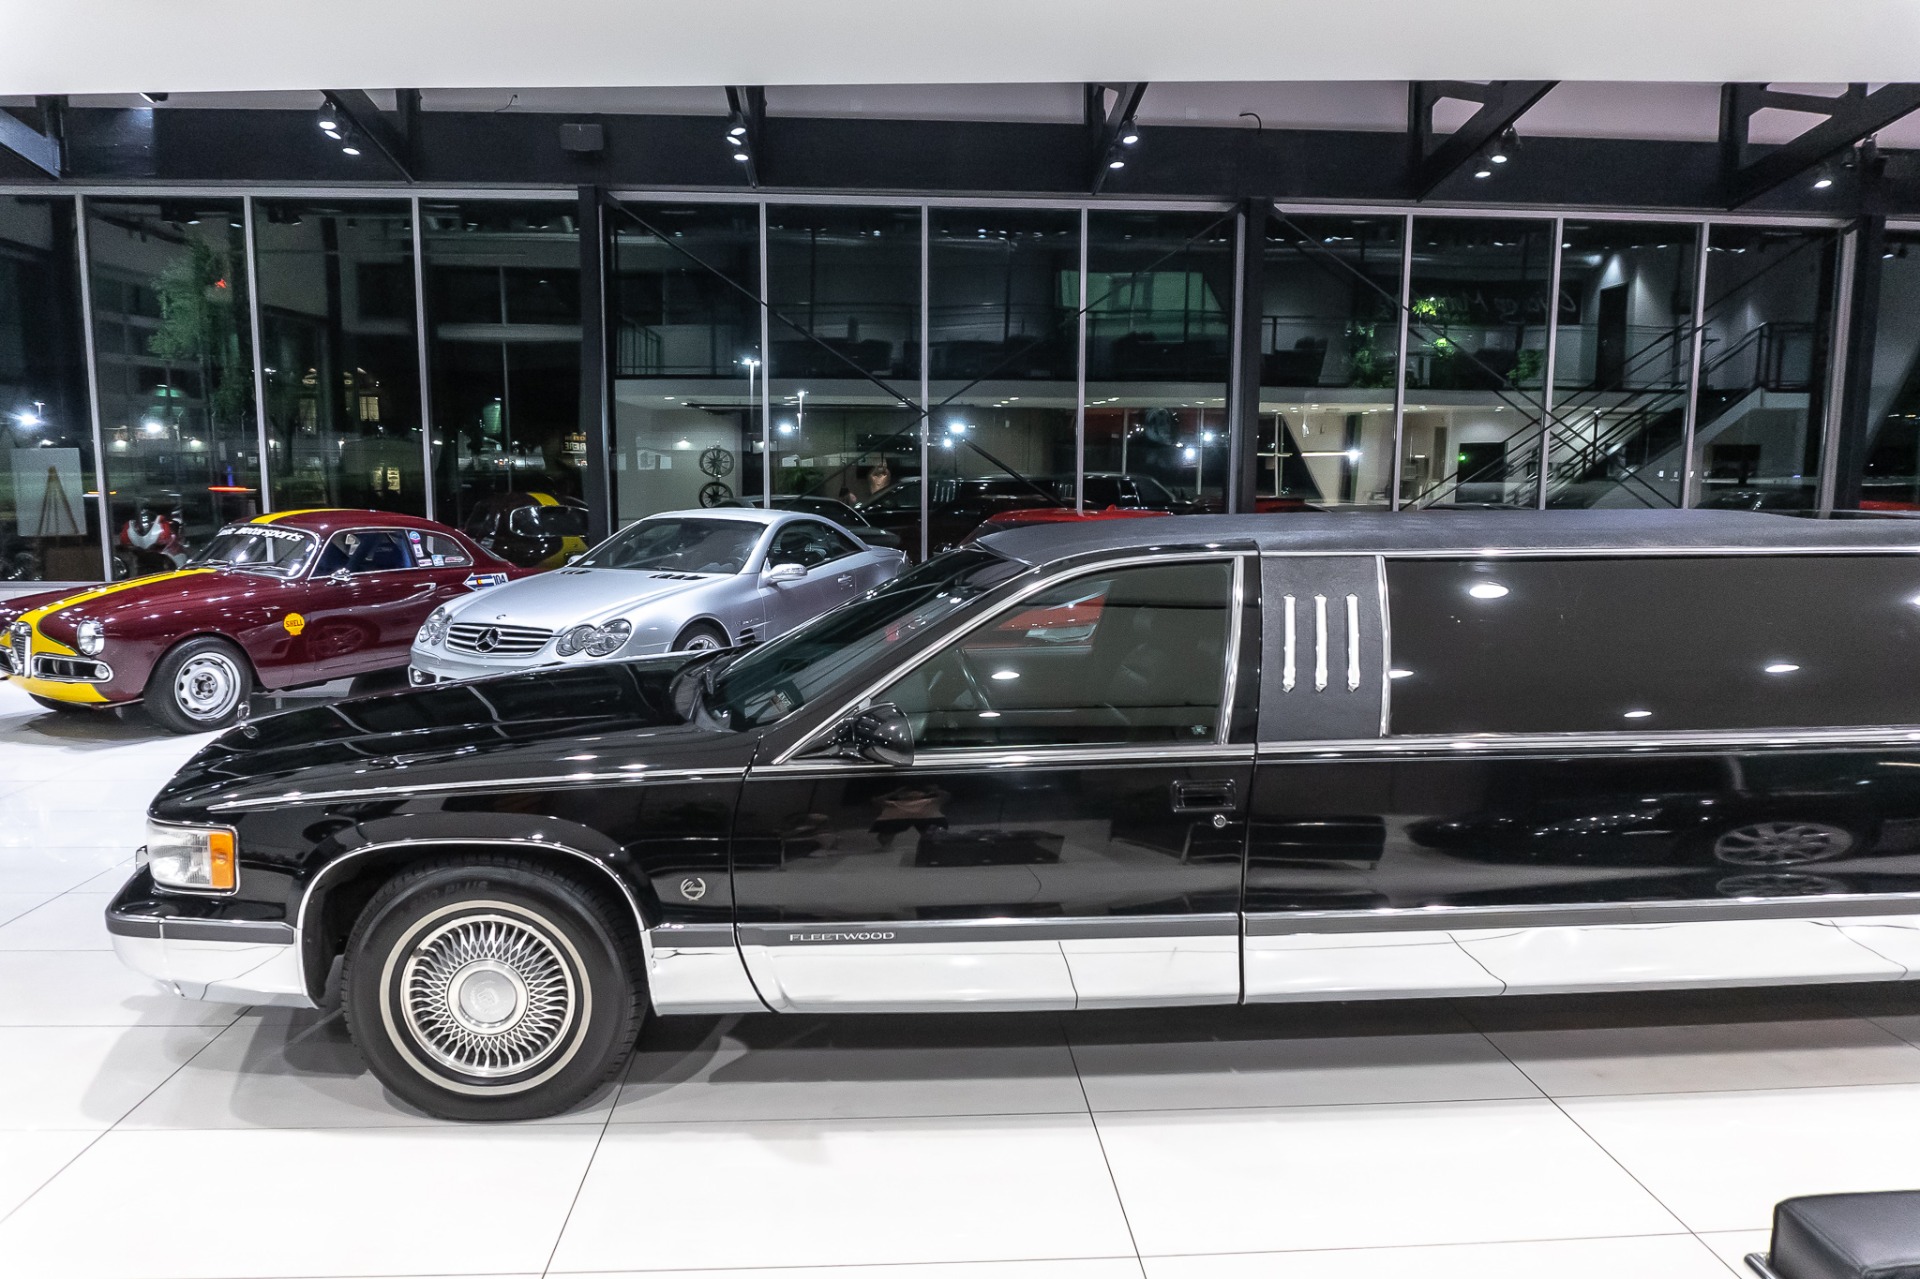 Used-1996-Cadillac-Fleetwood-Limousine-Rear-Partition-Private-Use-Only-Serviced